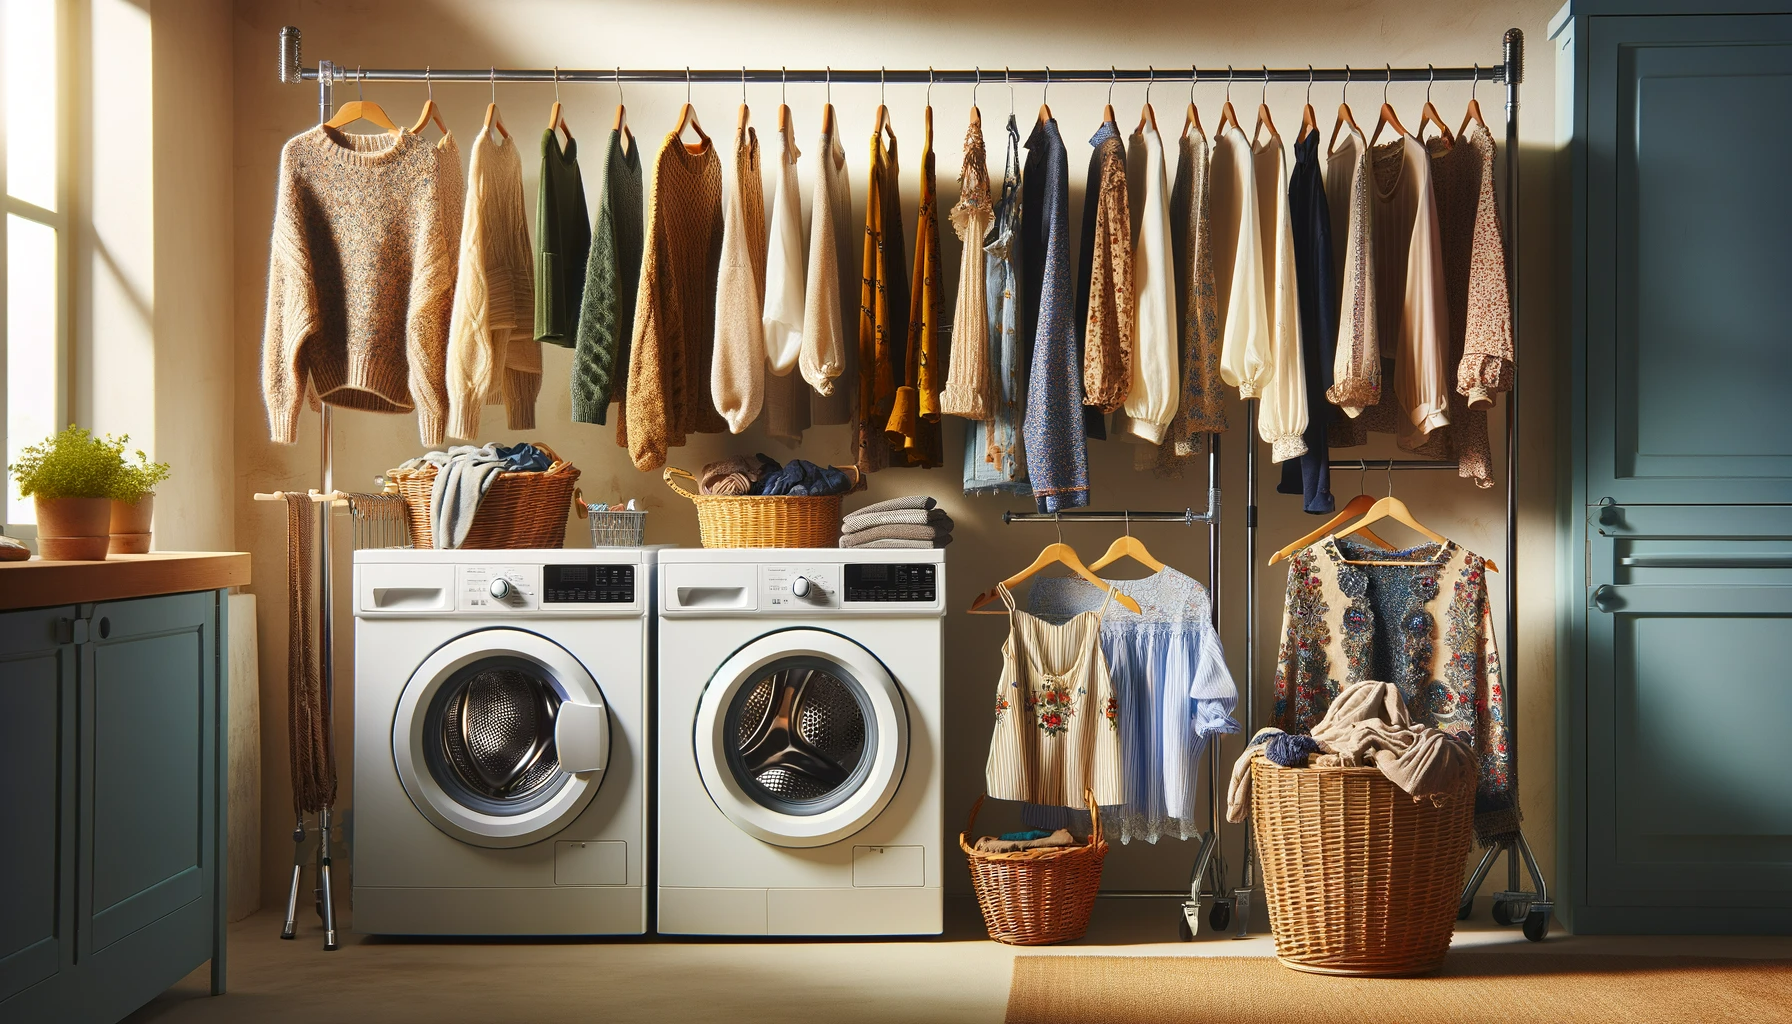 What Clothes Should Not Go In The Dryer: Protecting Your Fabrics